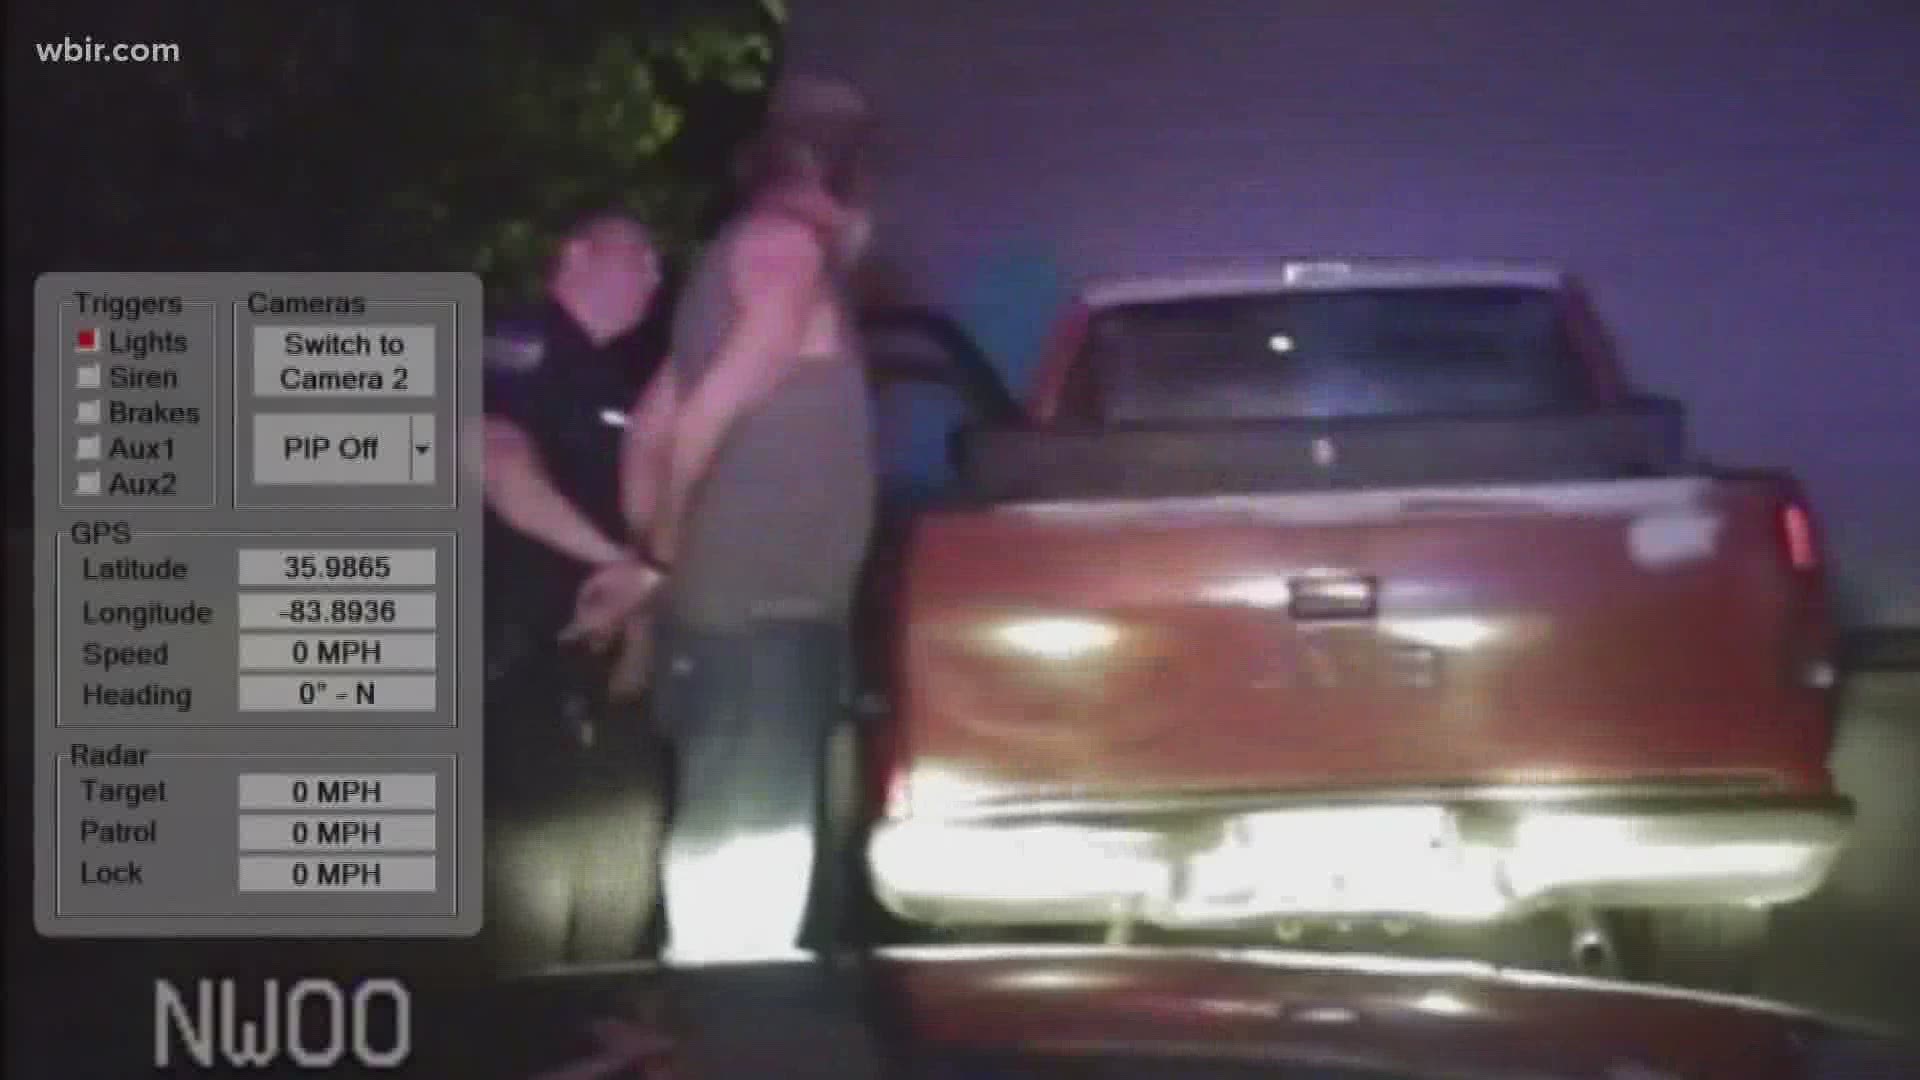 In the video, you see Raymond Taylor Junior being arrested.